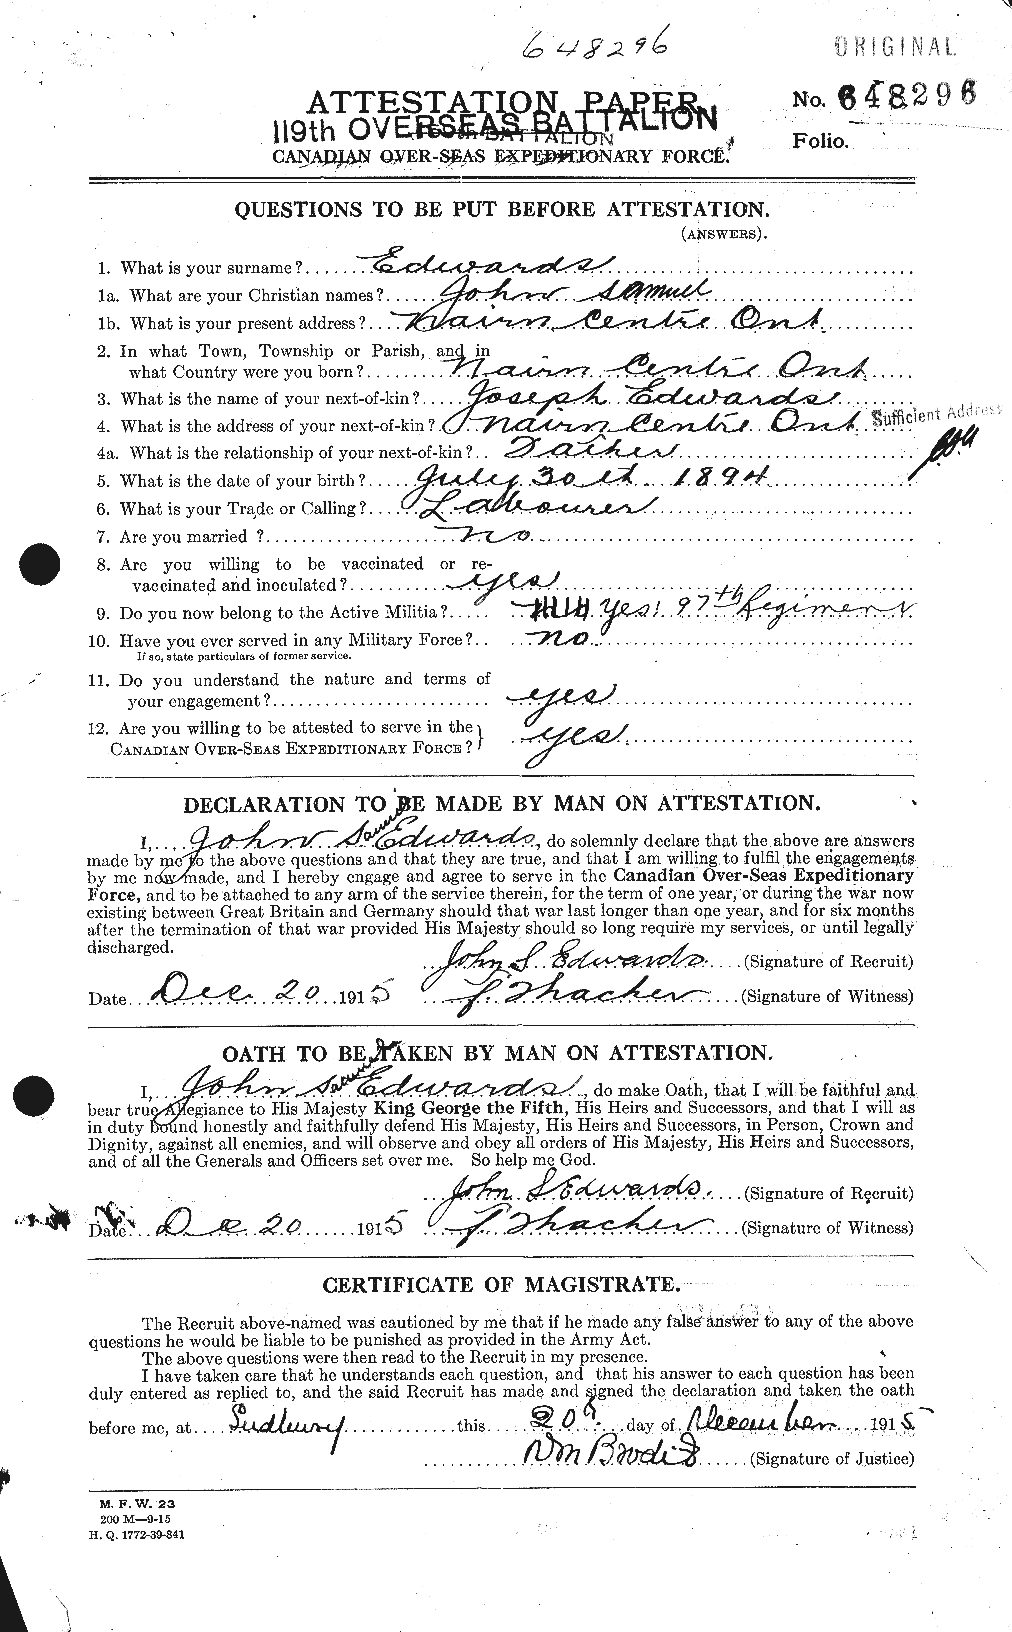 Personnel Records of the First World War - CEF 310153a